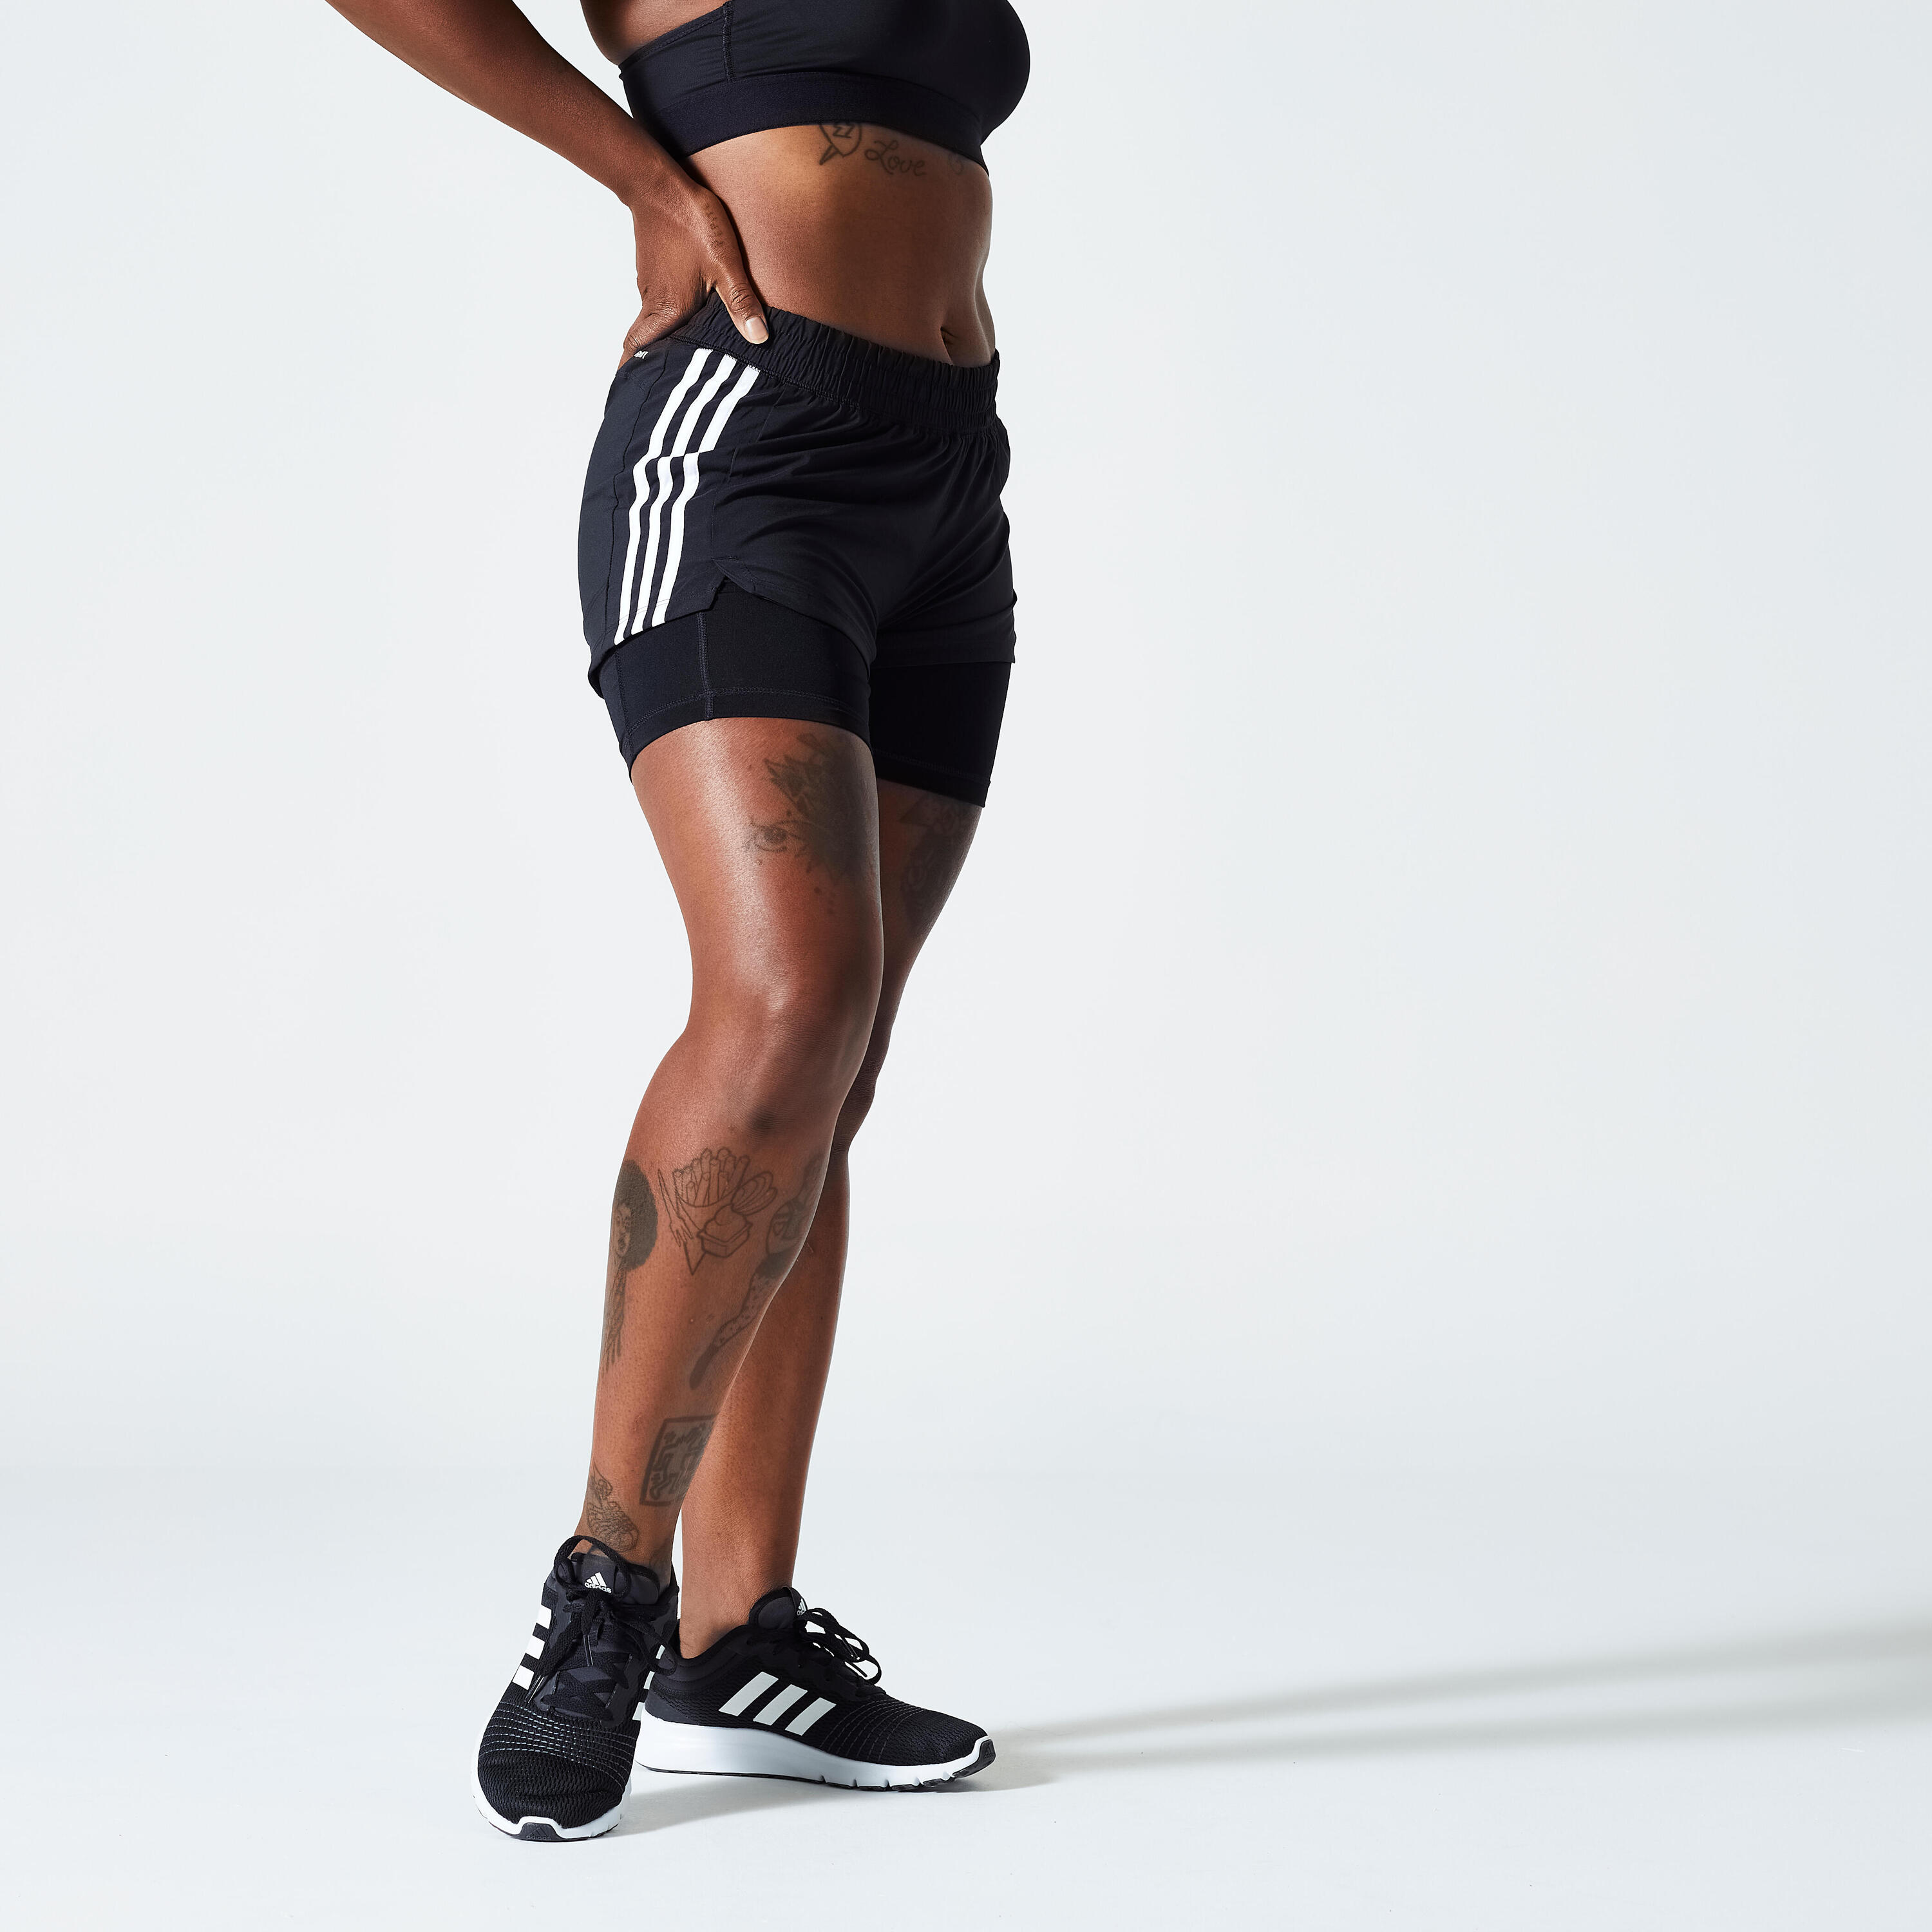 ADIDAS Women's 2-in-1 Cardio Fitness Shorts Pacer 3S